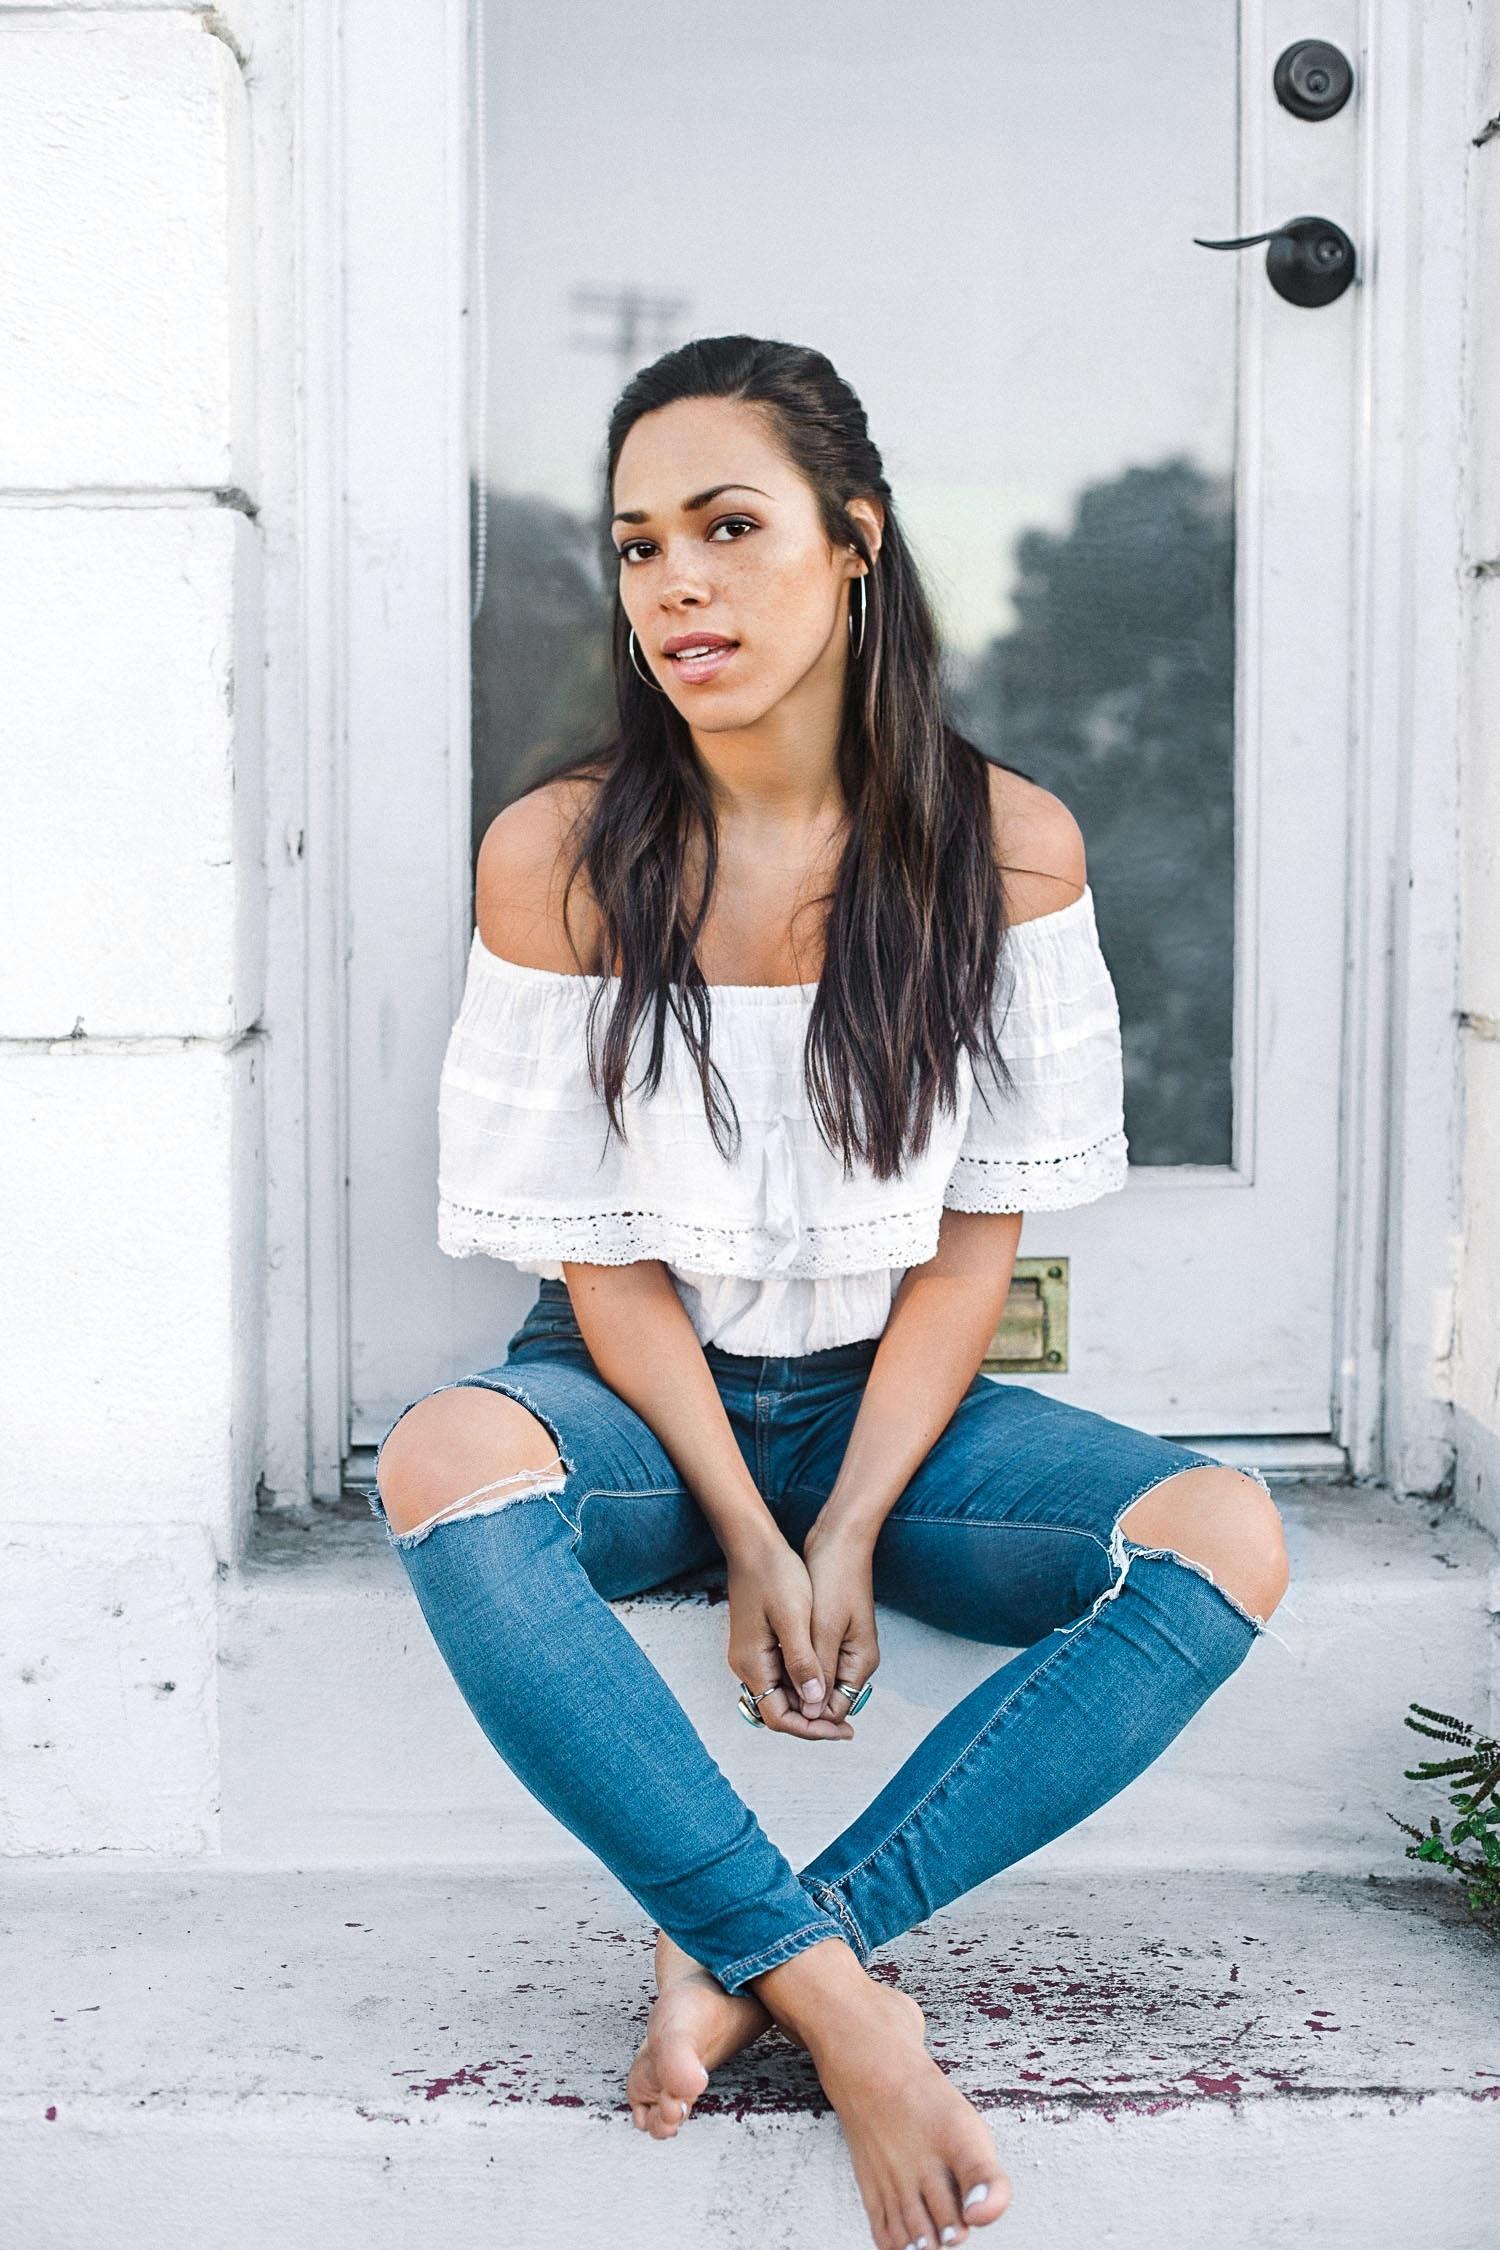 51 Sexy Jessica Camacho Boobs Pictures Will Induce Passionate Feelings for Her | Best Of Comic Books